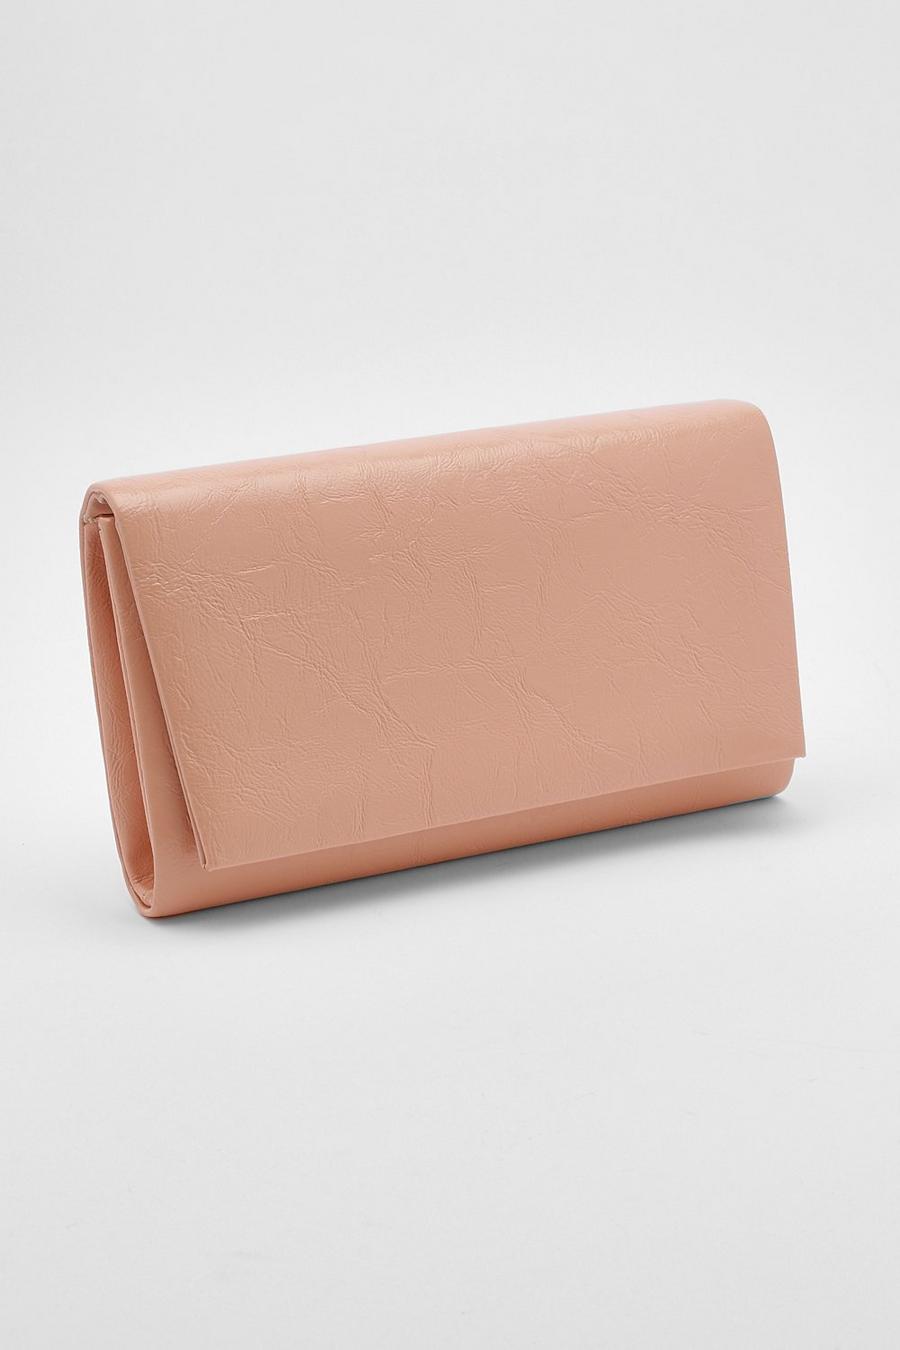 Nude Large Structured Clutch 